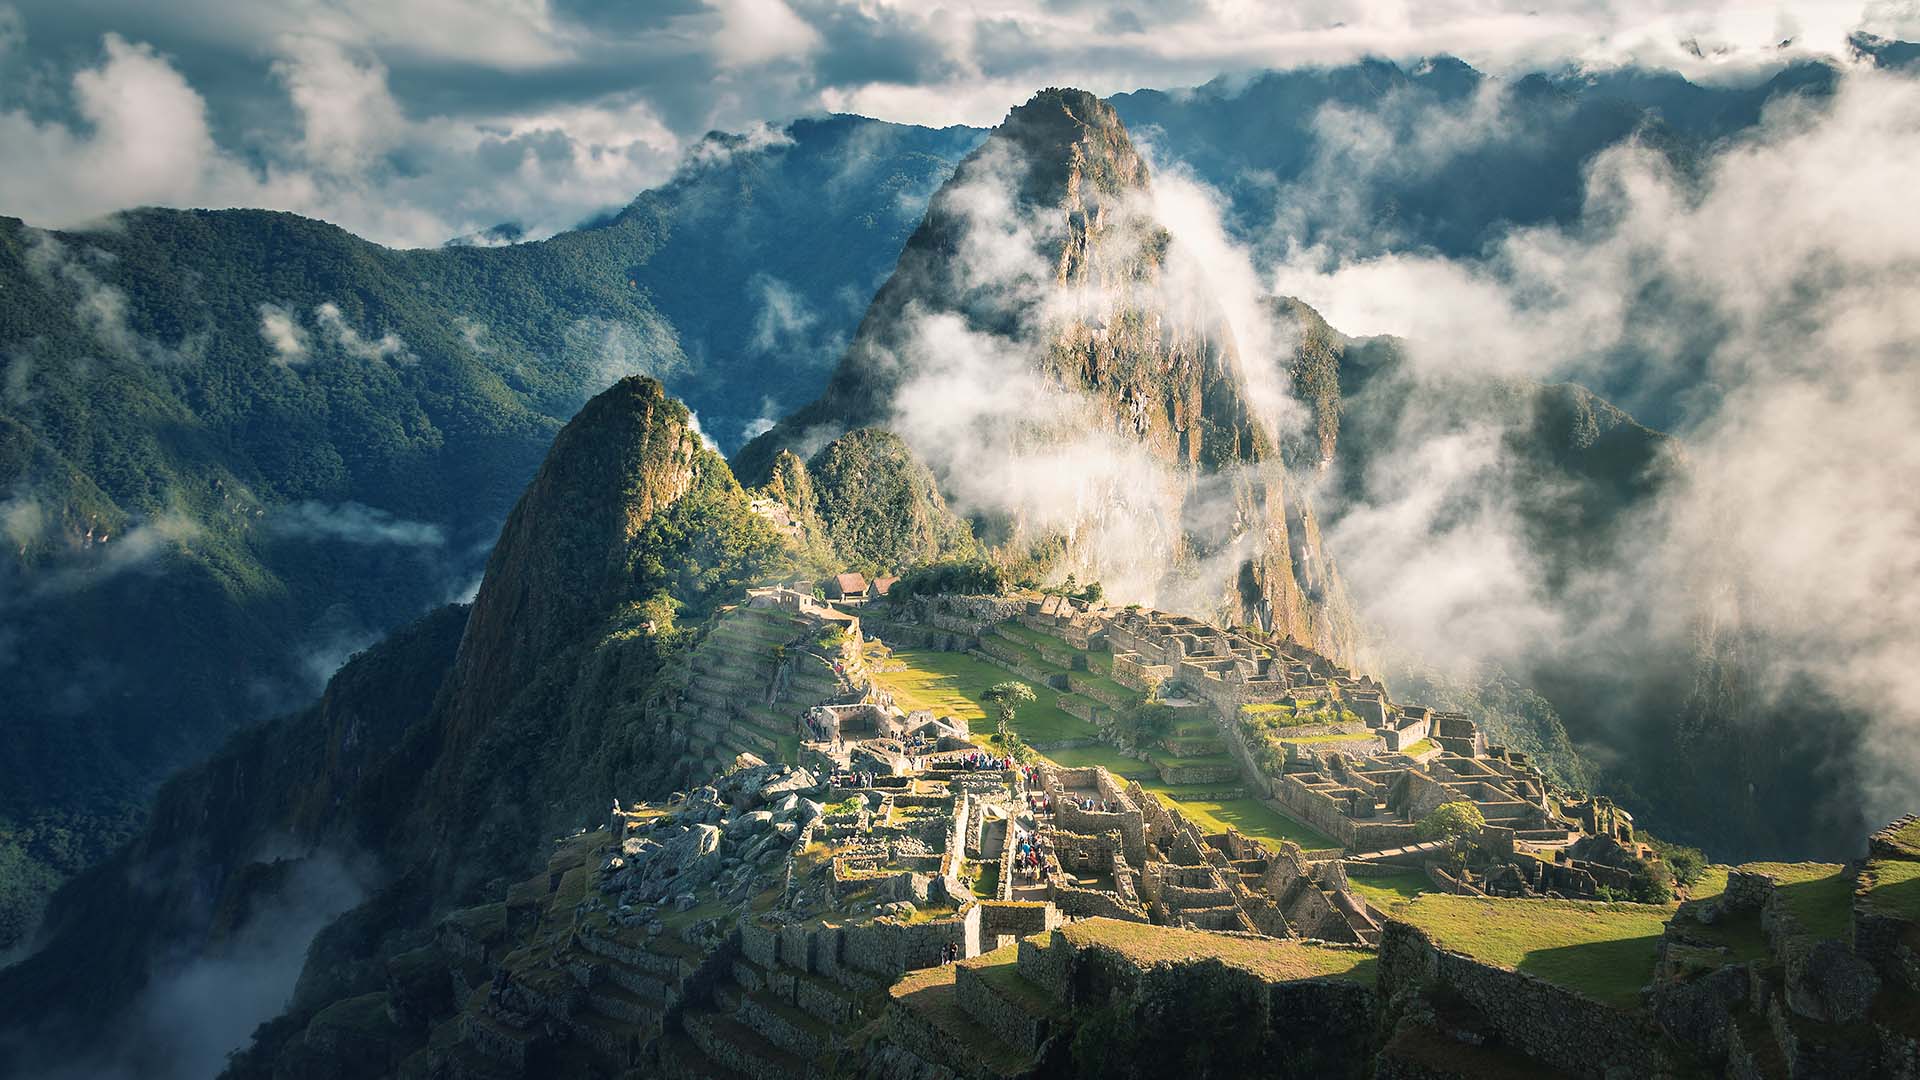 6 Sacred Sites to Visit Around the World